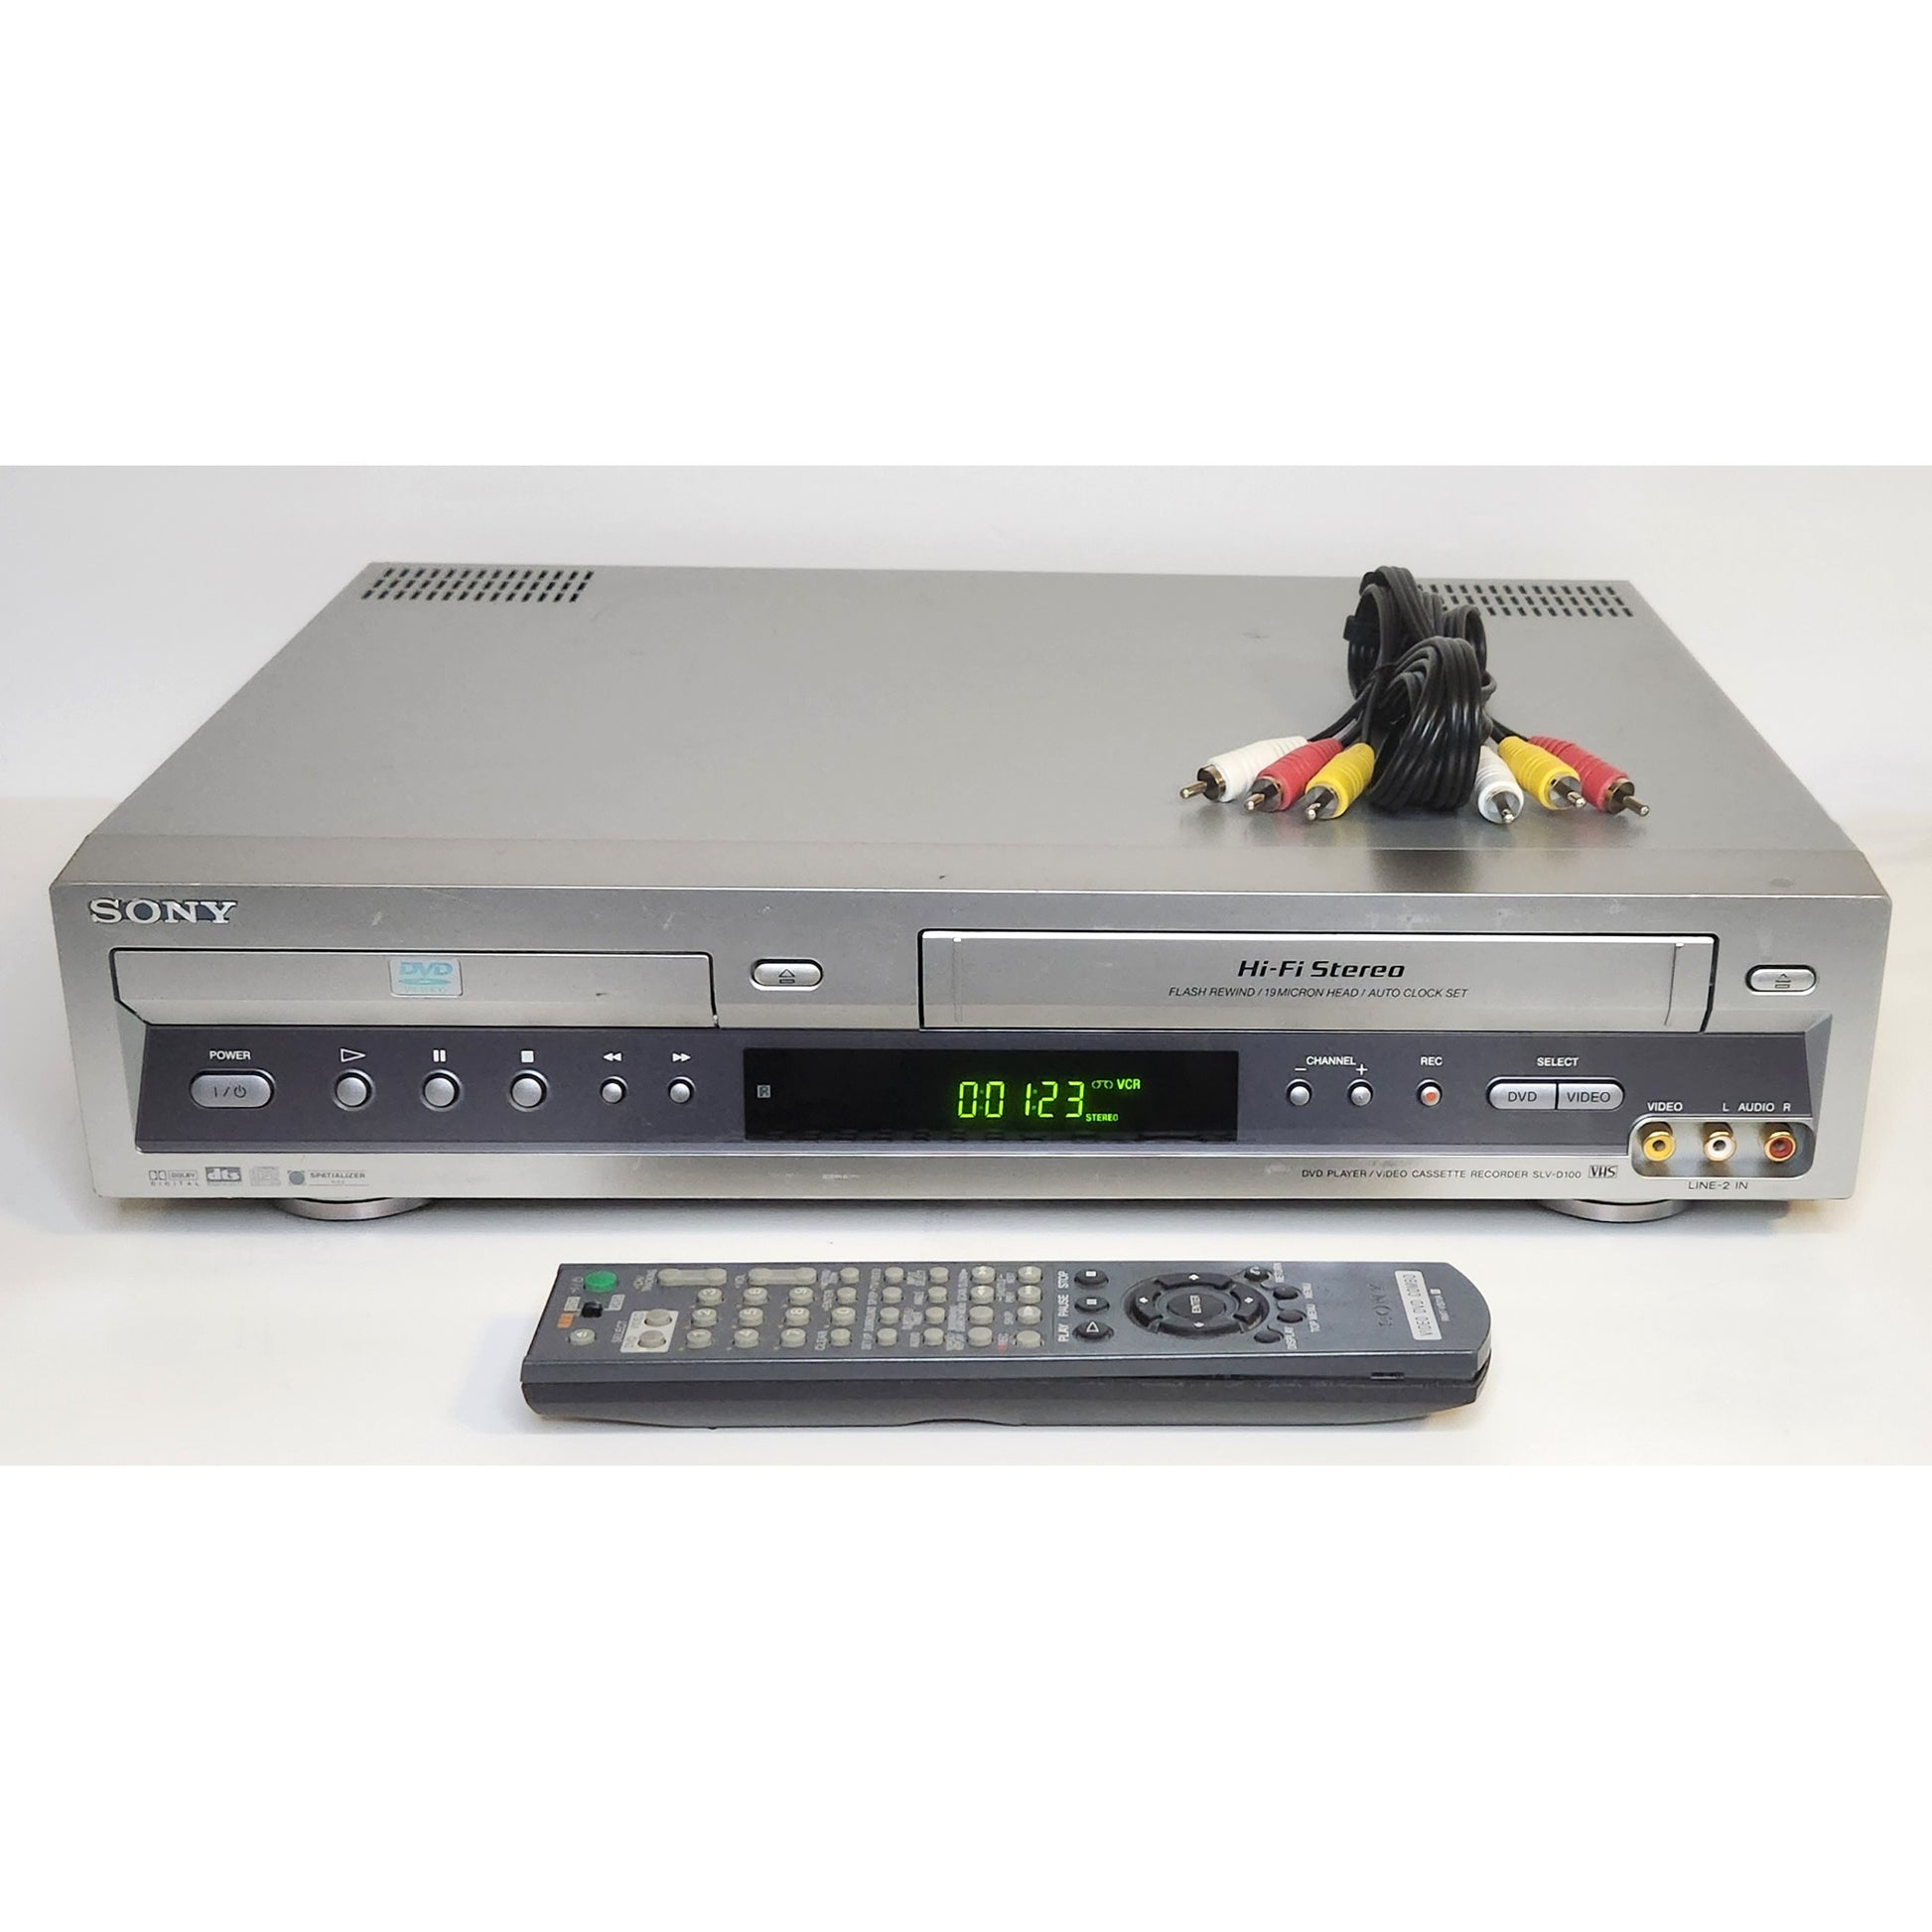 Sony SLV-D100 VCR/DVD Player Combo